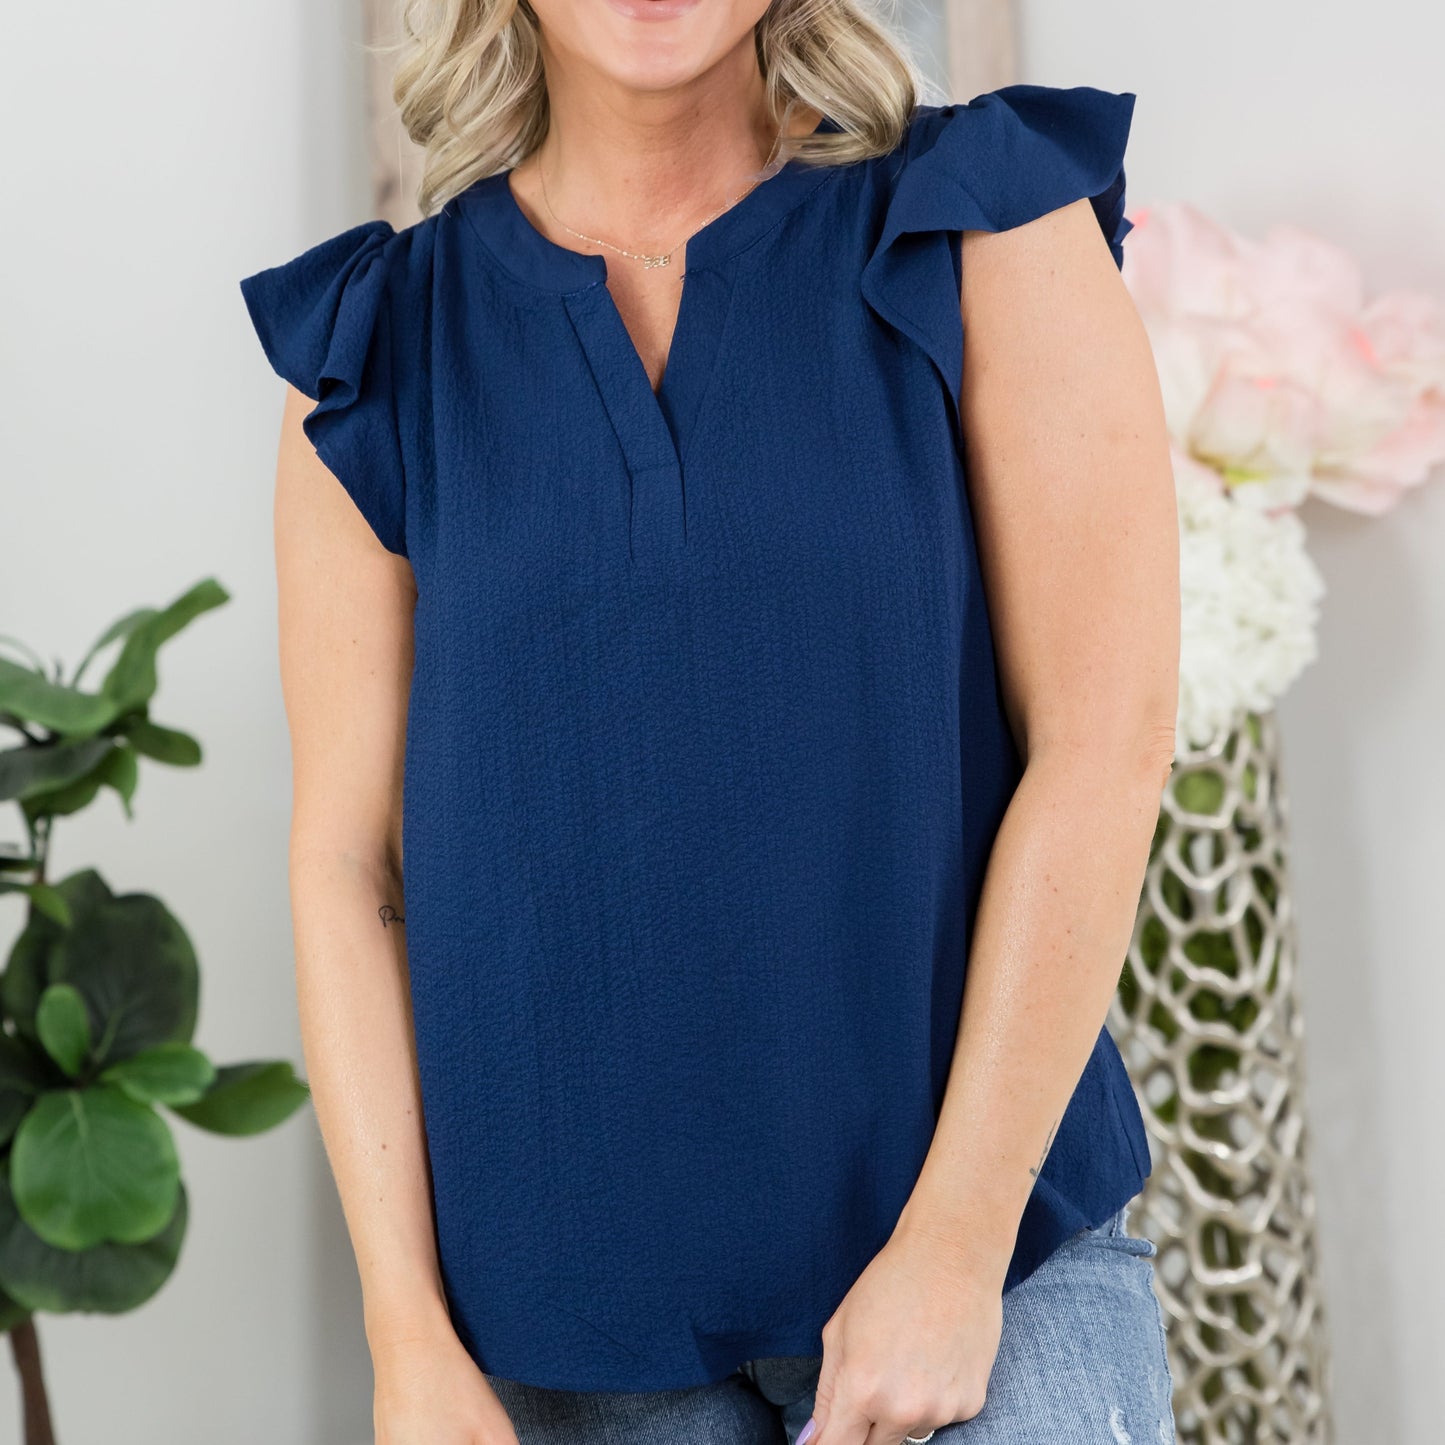 Charming Top in Navy